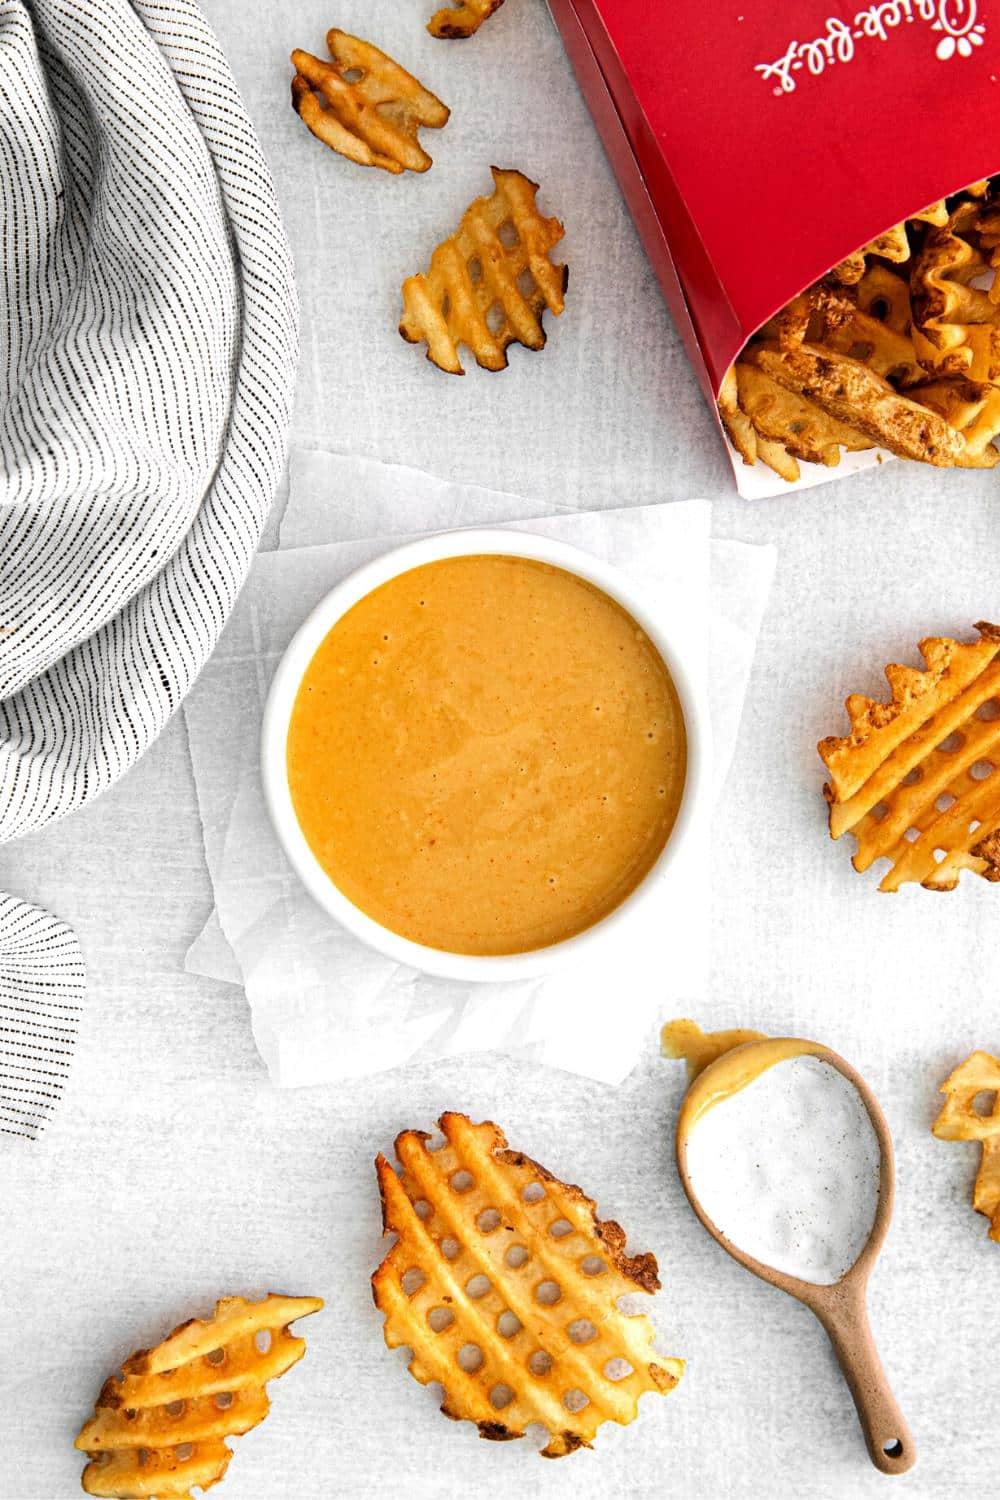 A bowl of homemade Chick-Fil-A sauce next to genuine CFA waffle potato fries for dipping.